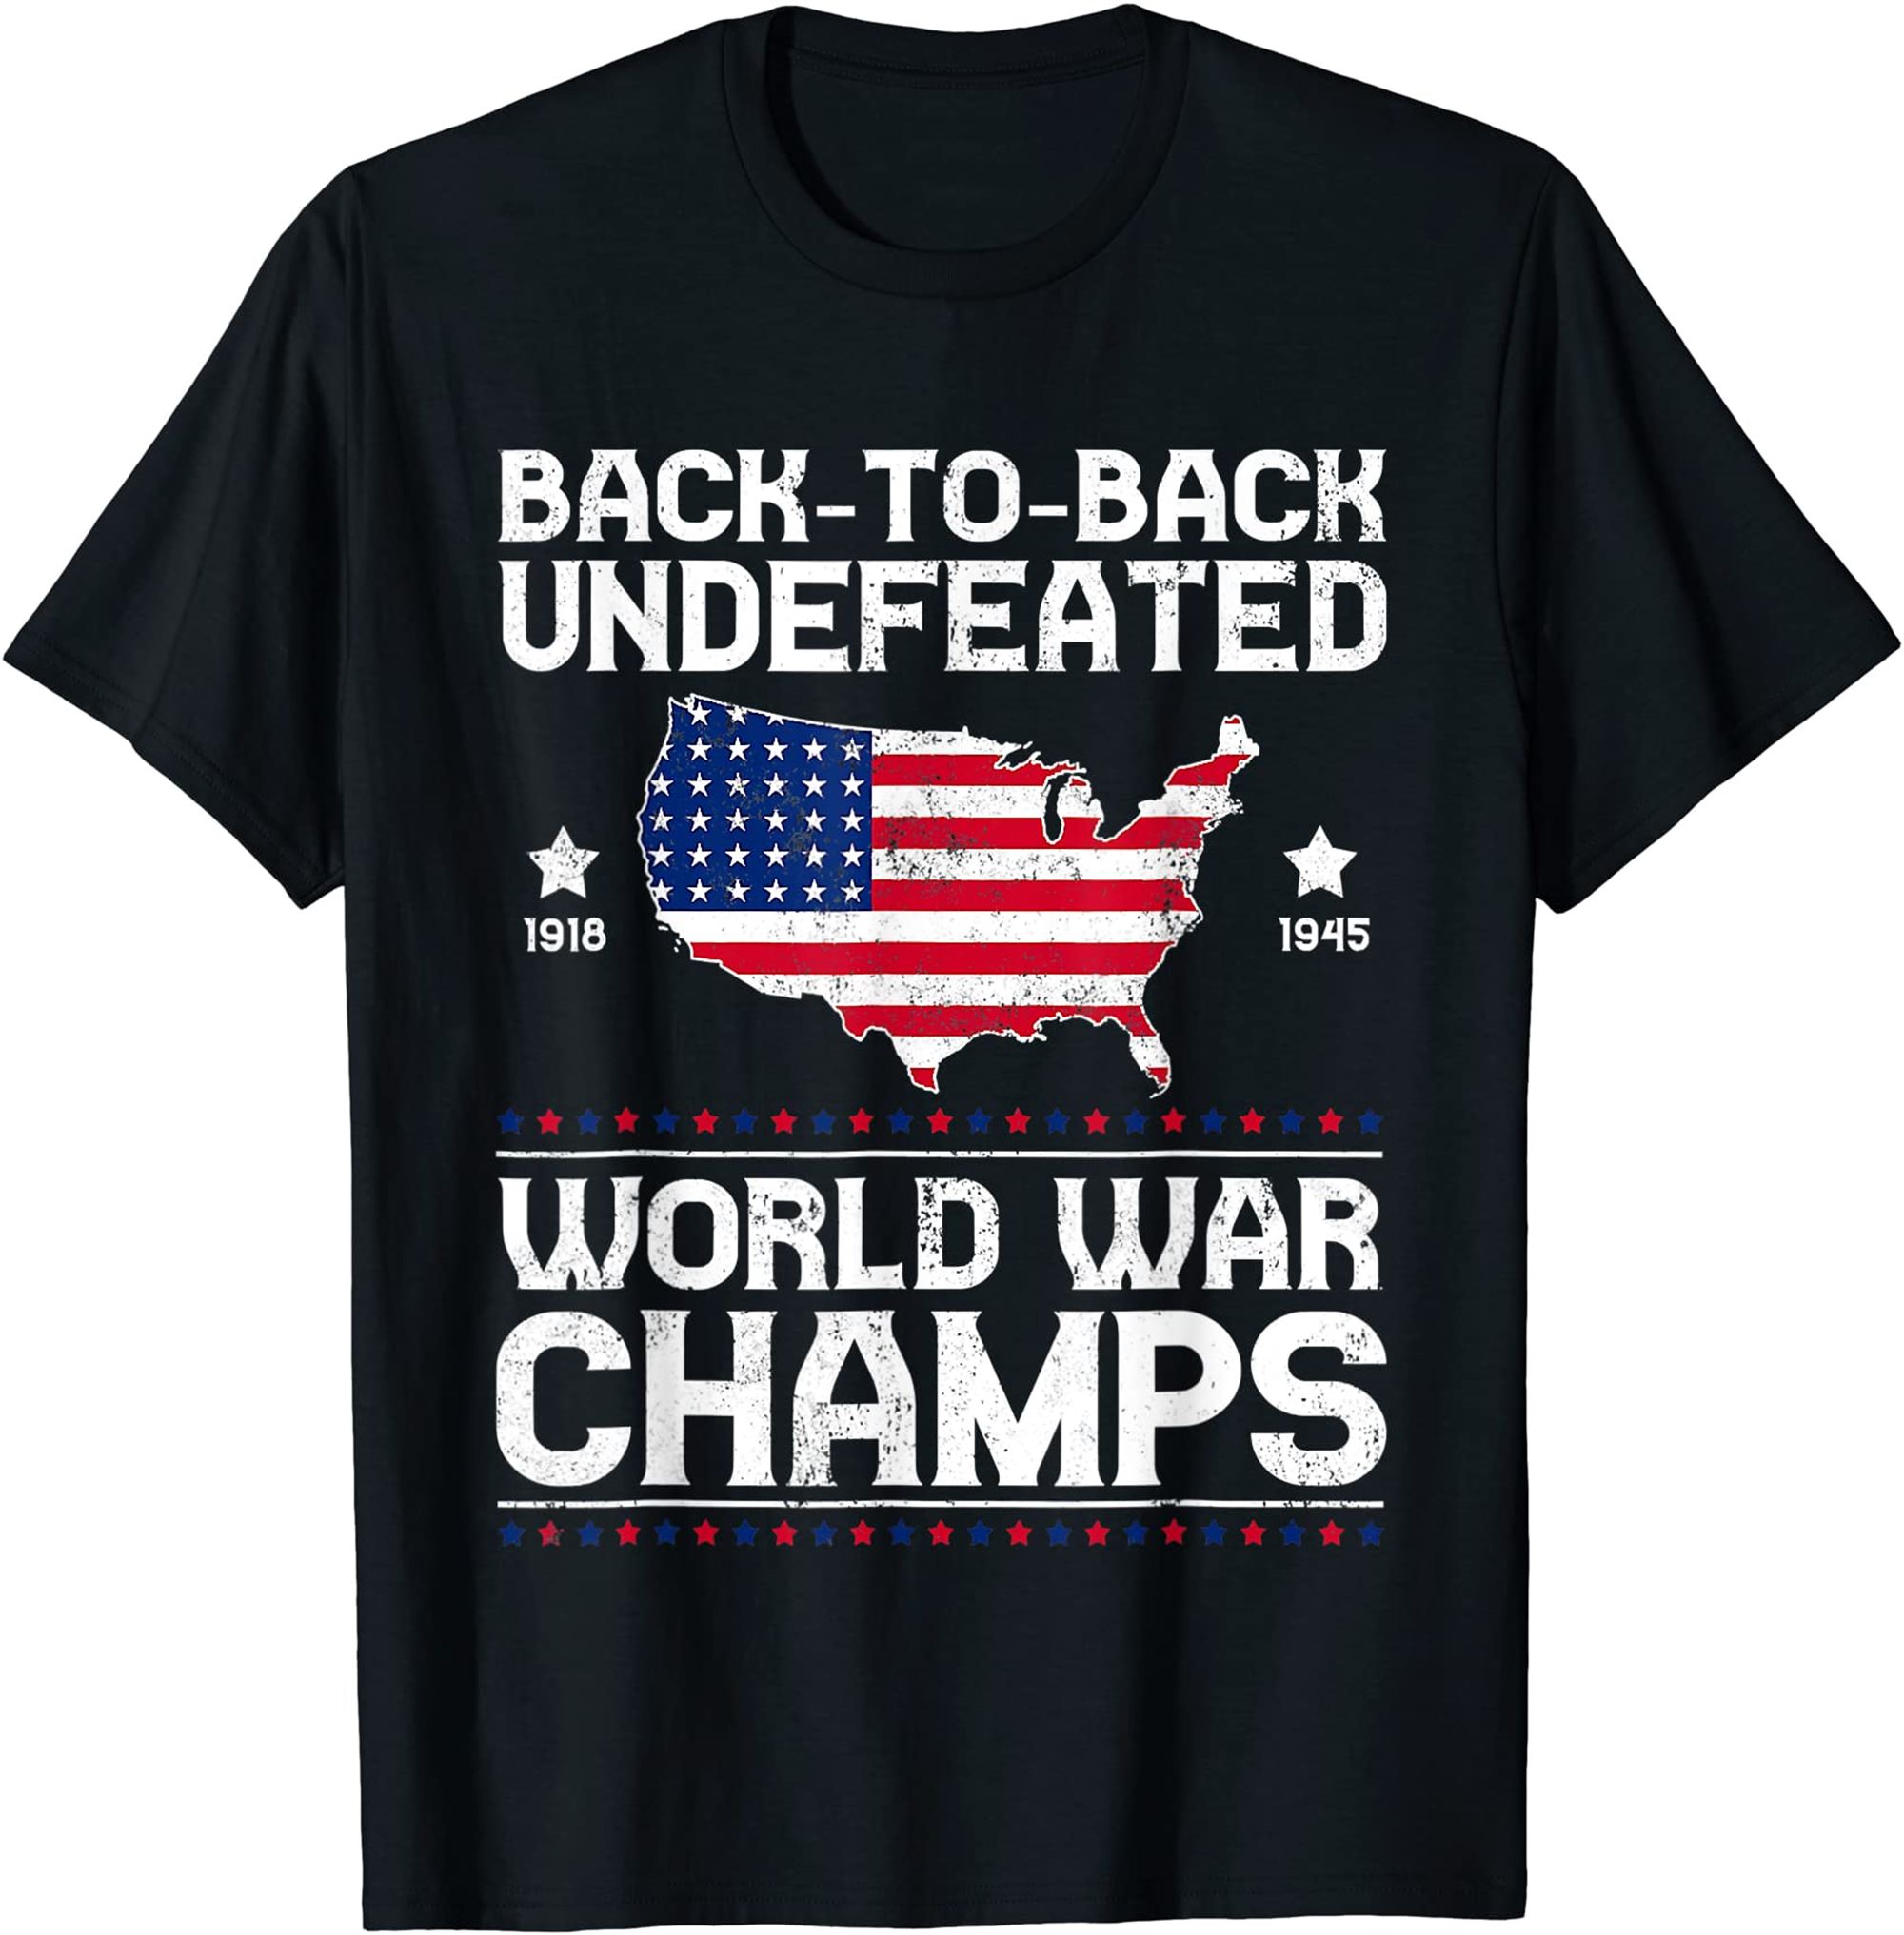 Back To Back Undefeated World War Champs 4th Of July T-shirt Full Size Up To 5xl